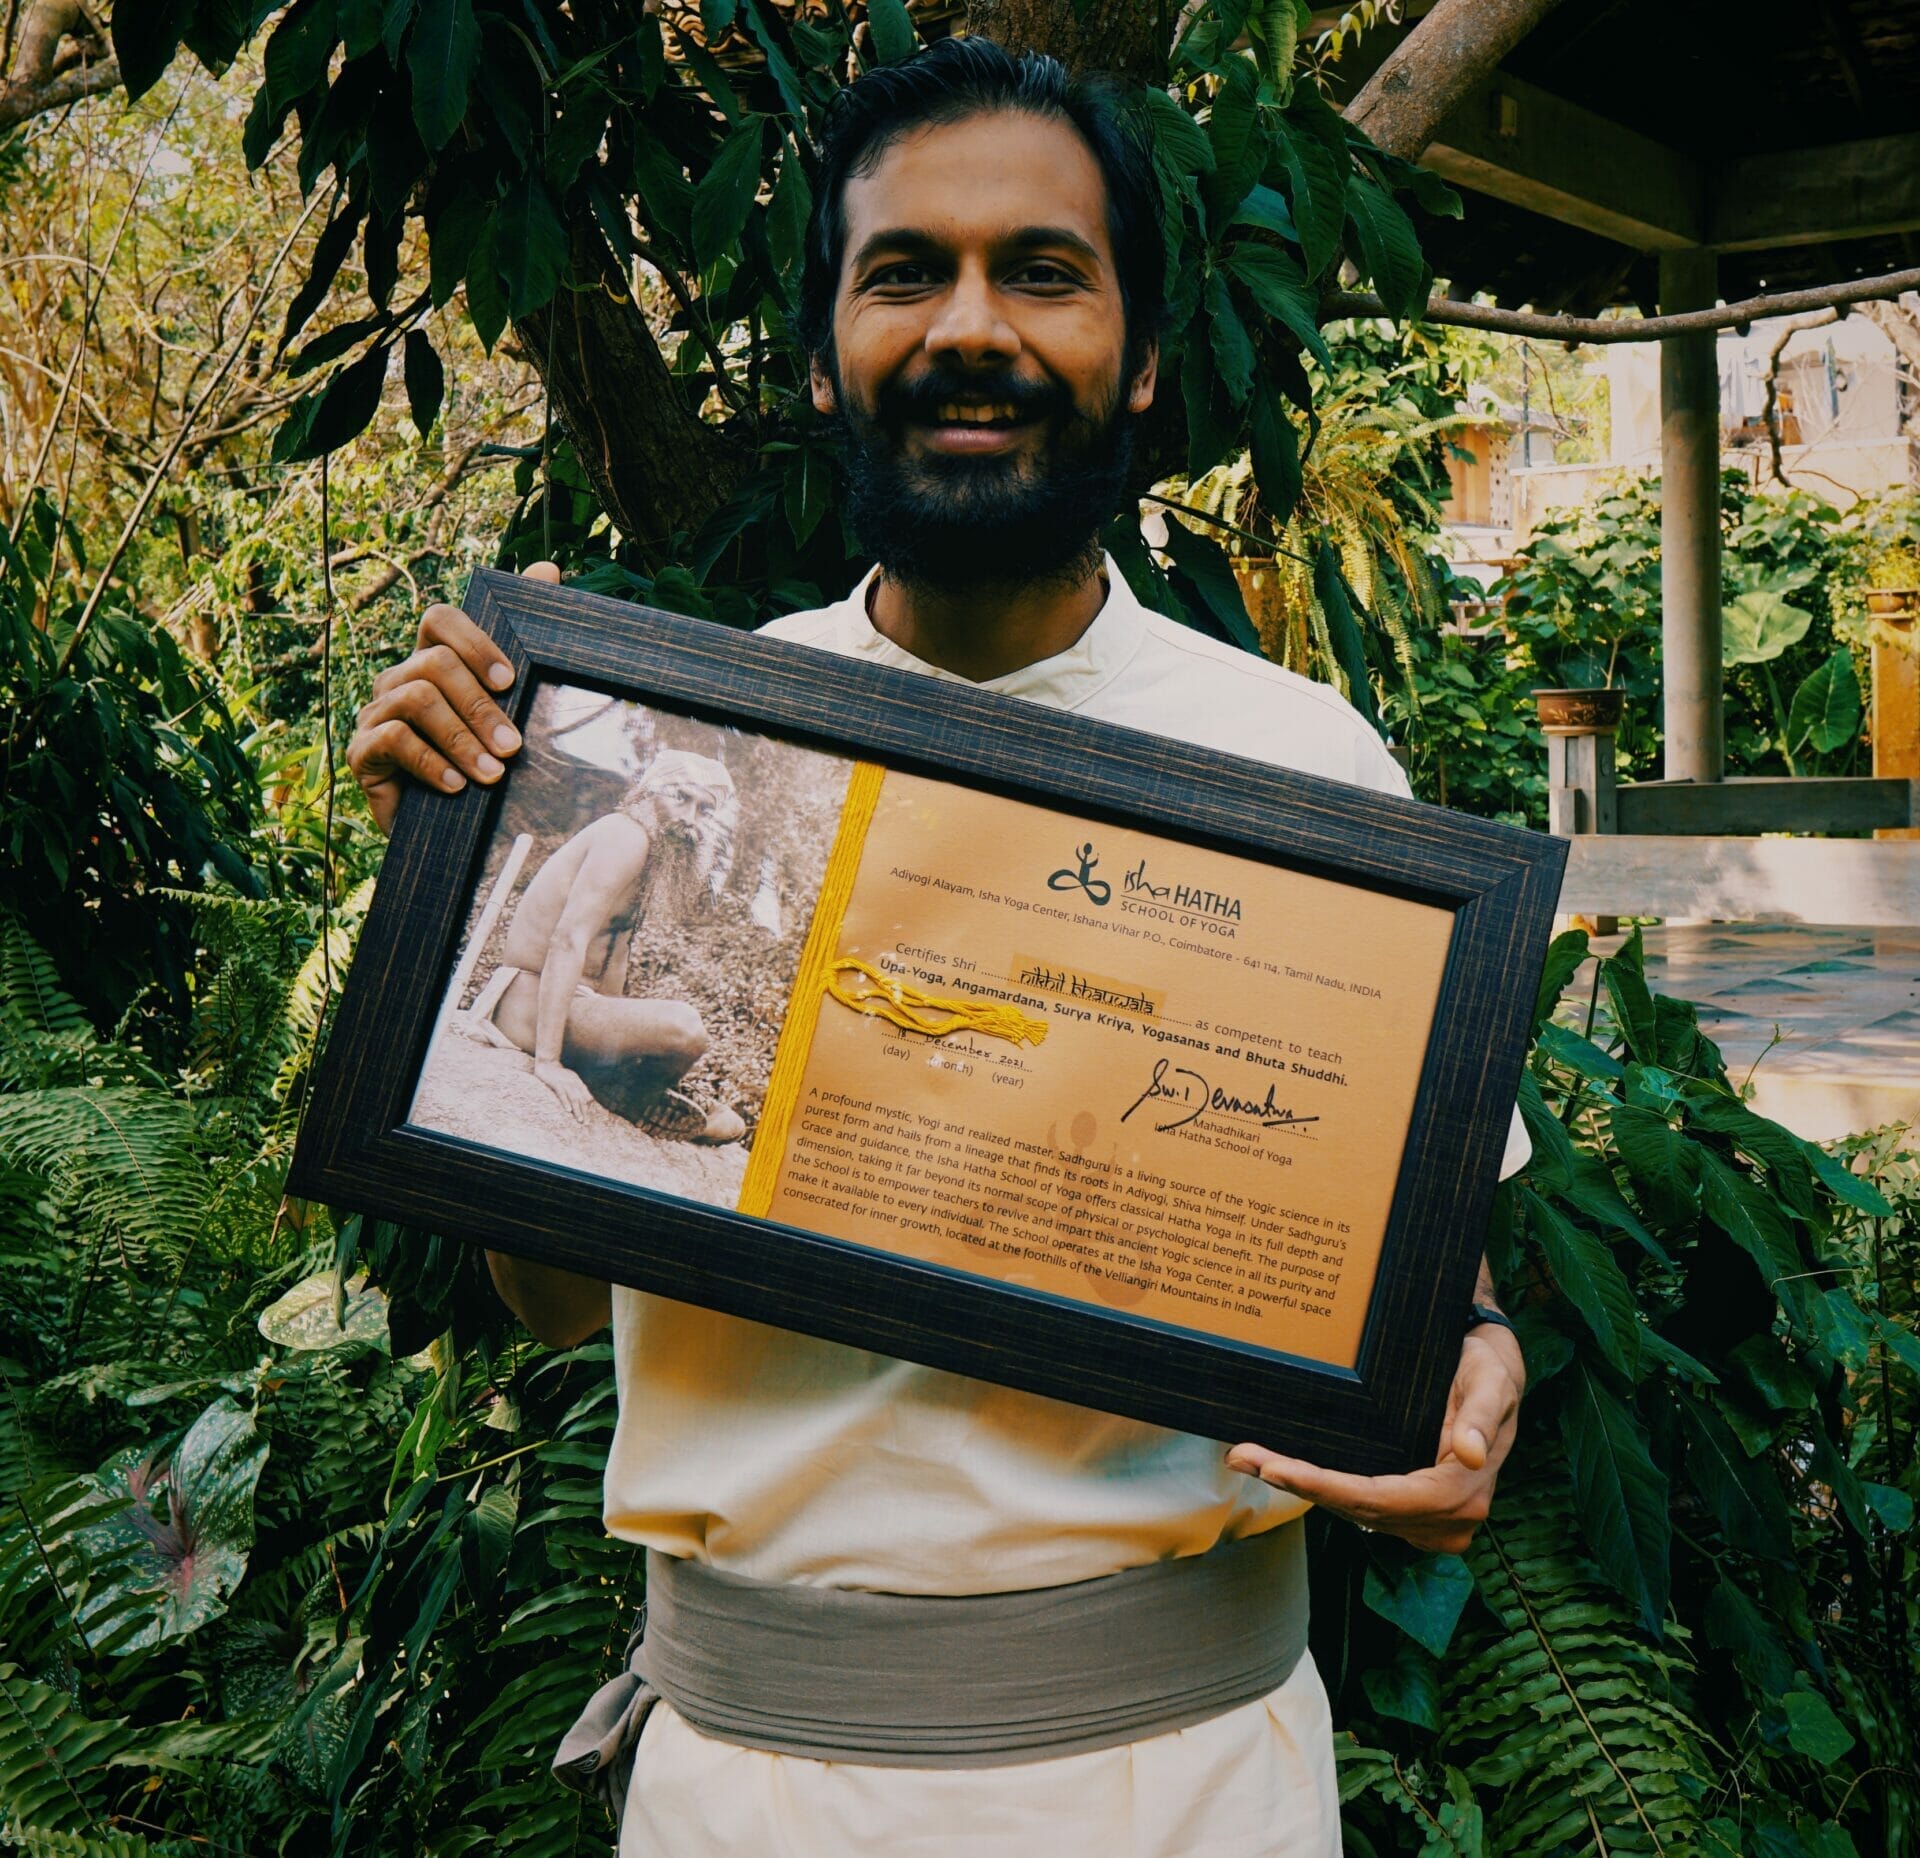 A yoga practitioner, Isha, celebrates his achievement in India by holding a framed certificate in front of a tree.